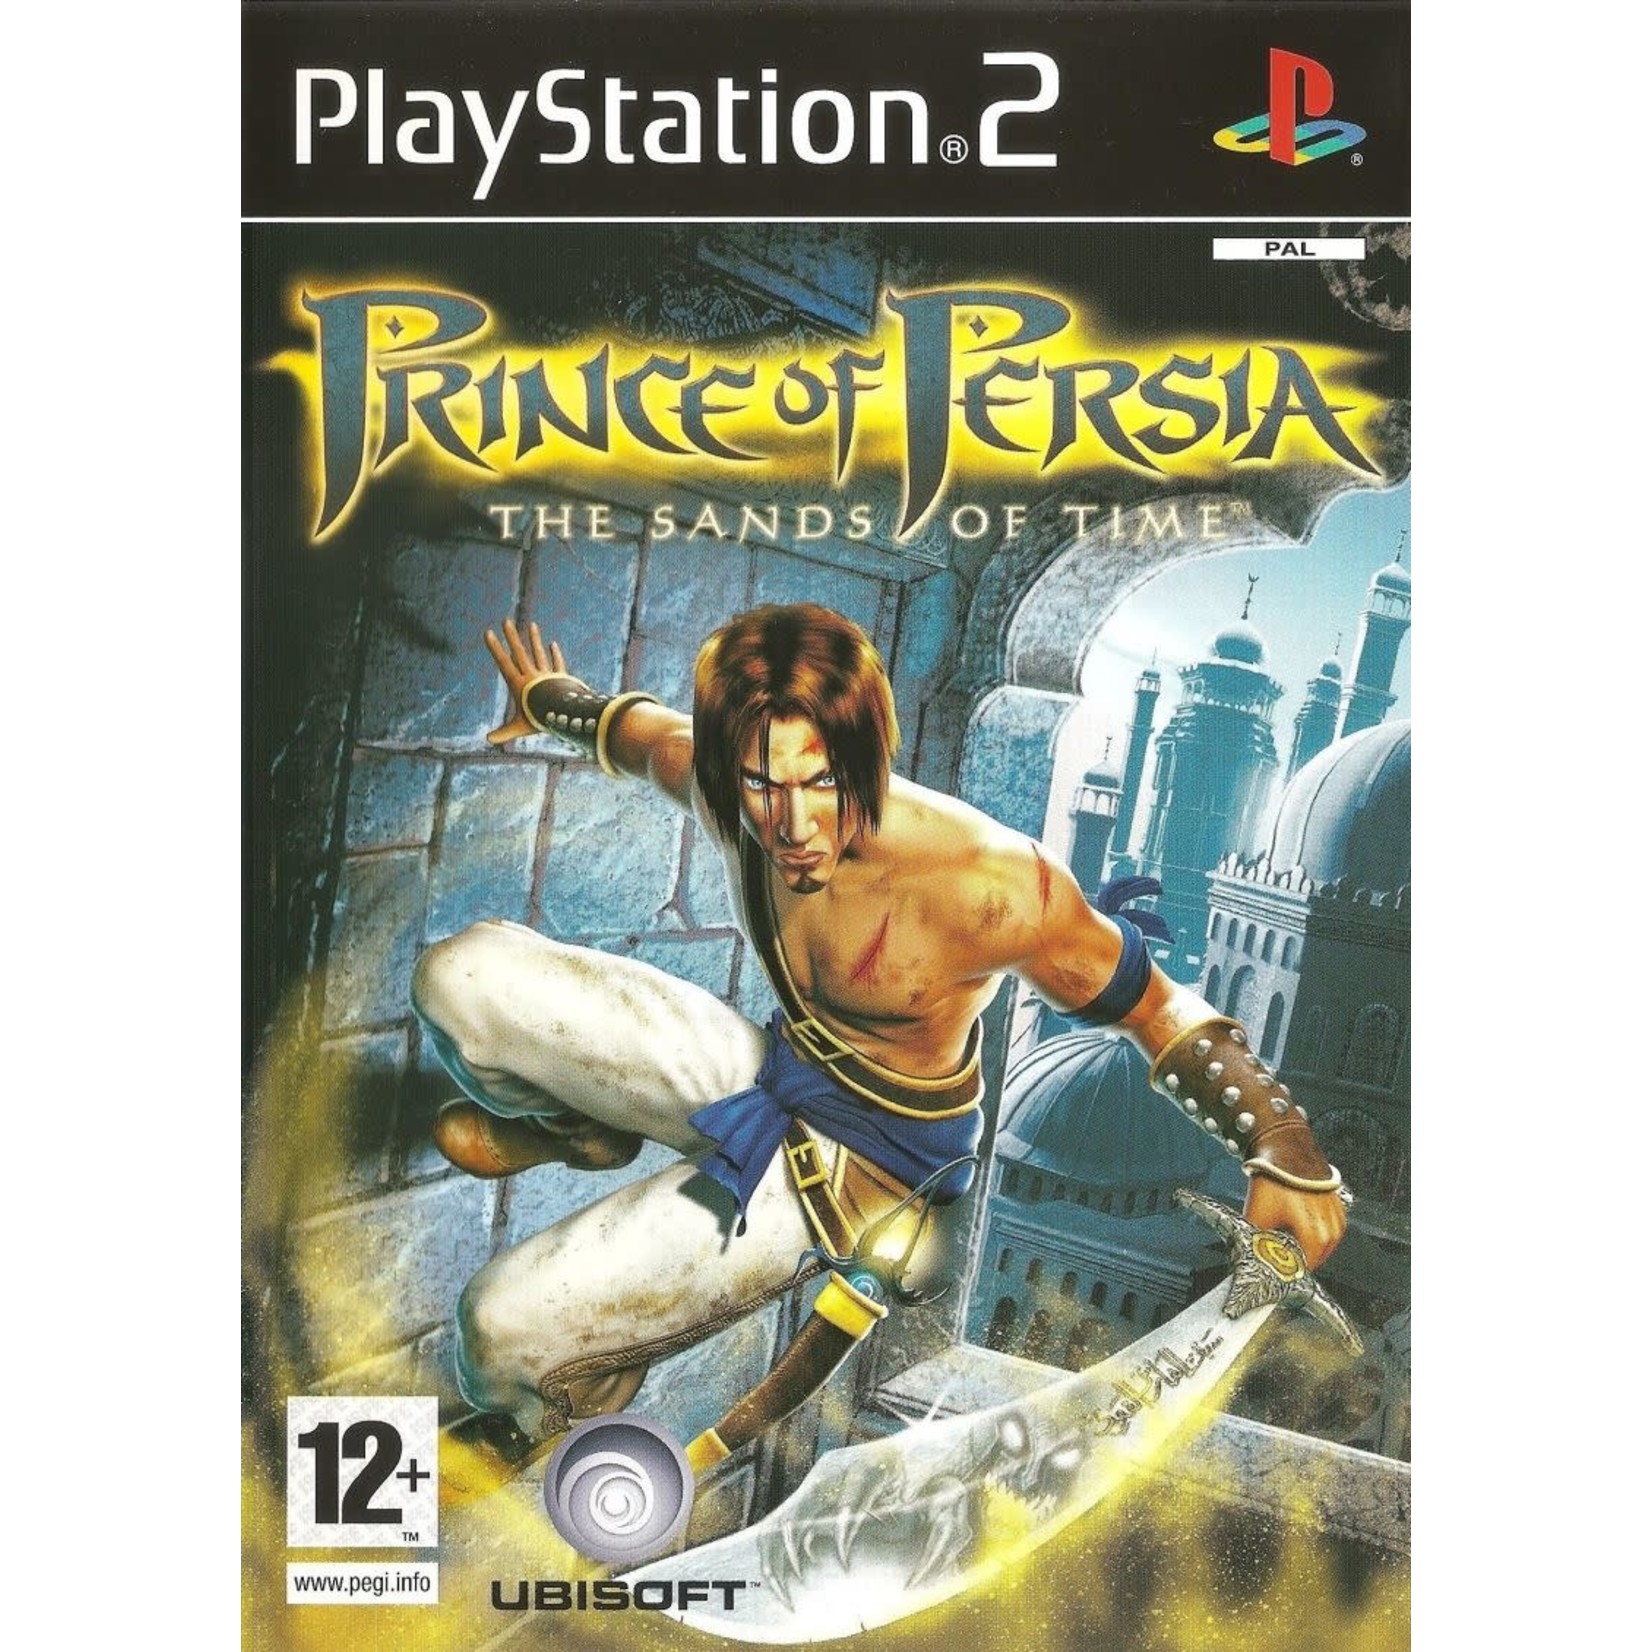 Prince of Persia Sands of Time - Bonfire Games